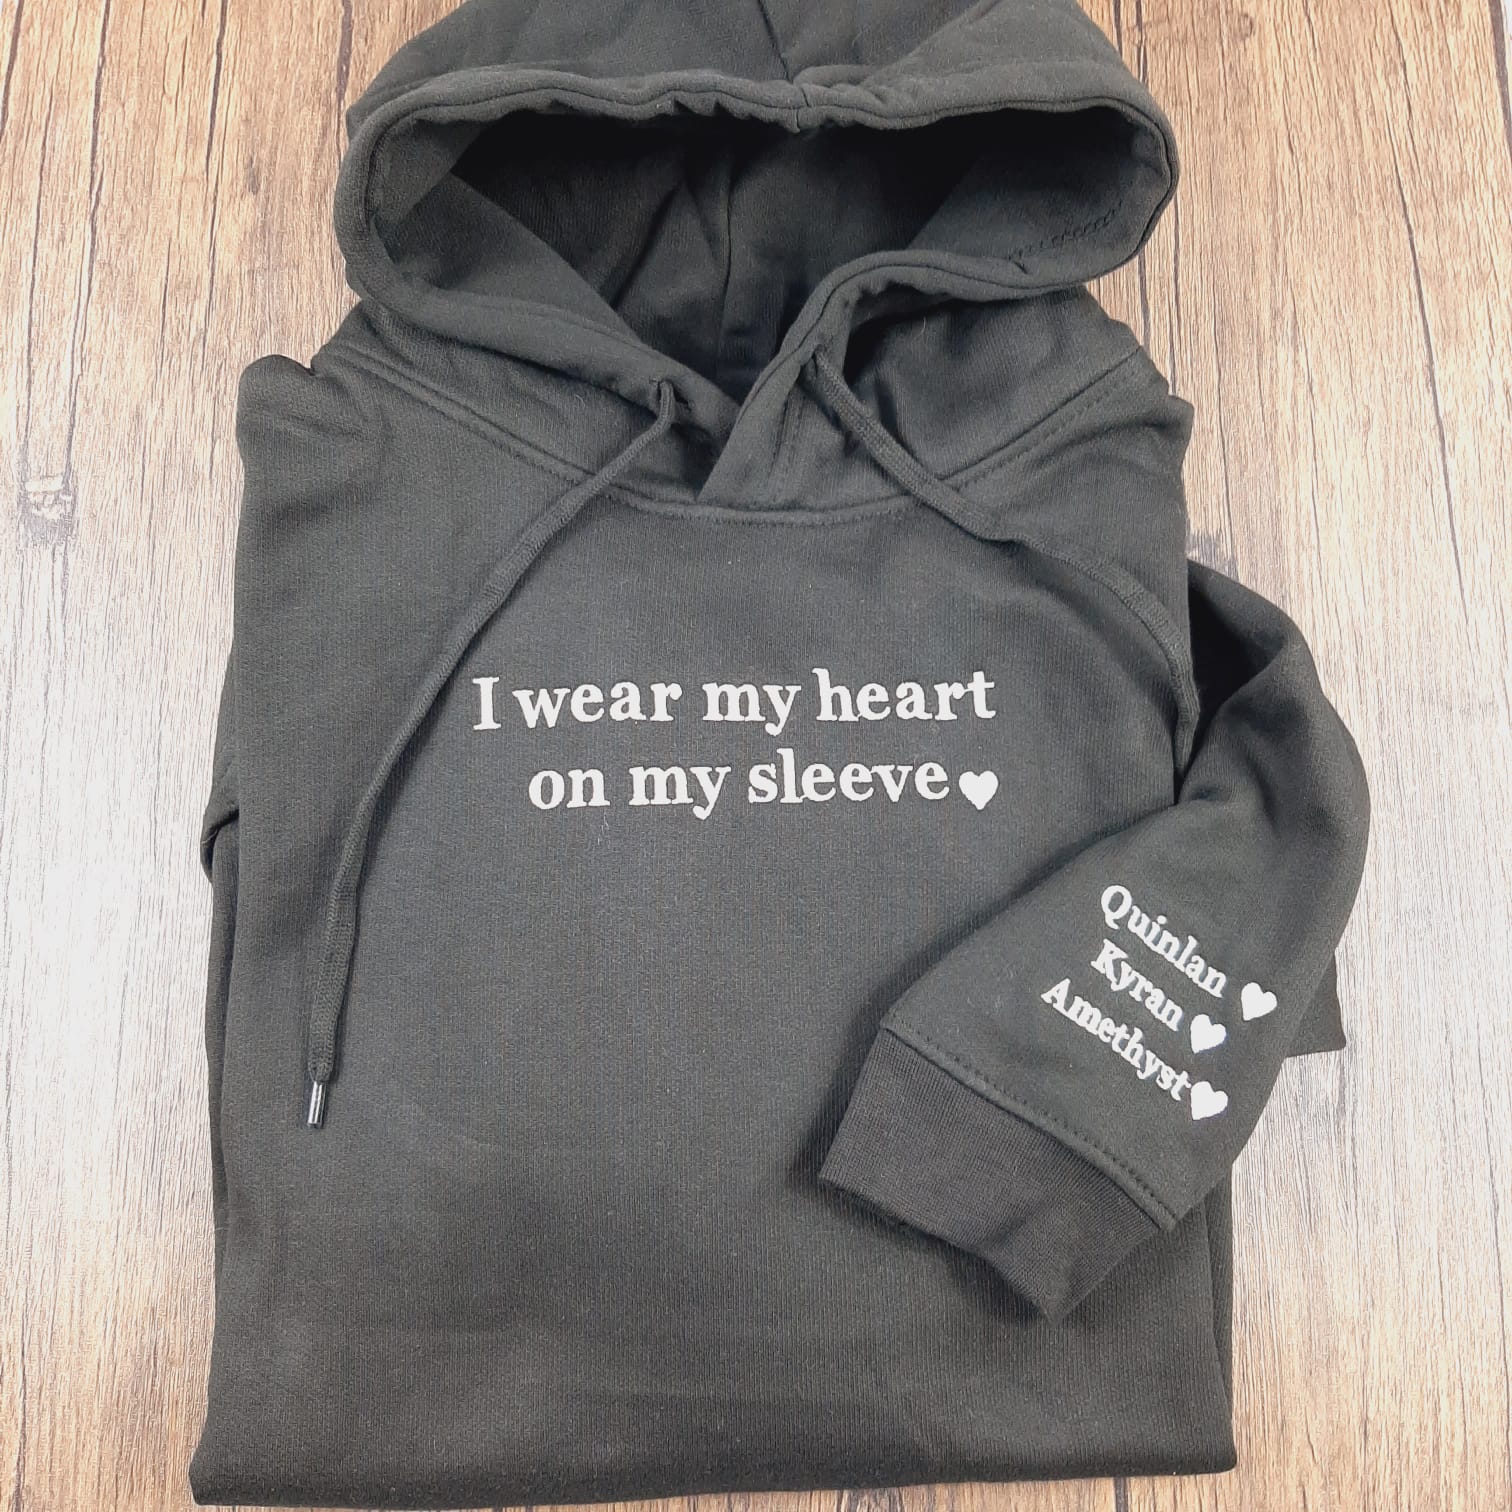 Heart on my Sleeve Hoodie, personalised mother day present of gift for mum gift for her, embroidered with names and hearts on sleeve. in black